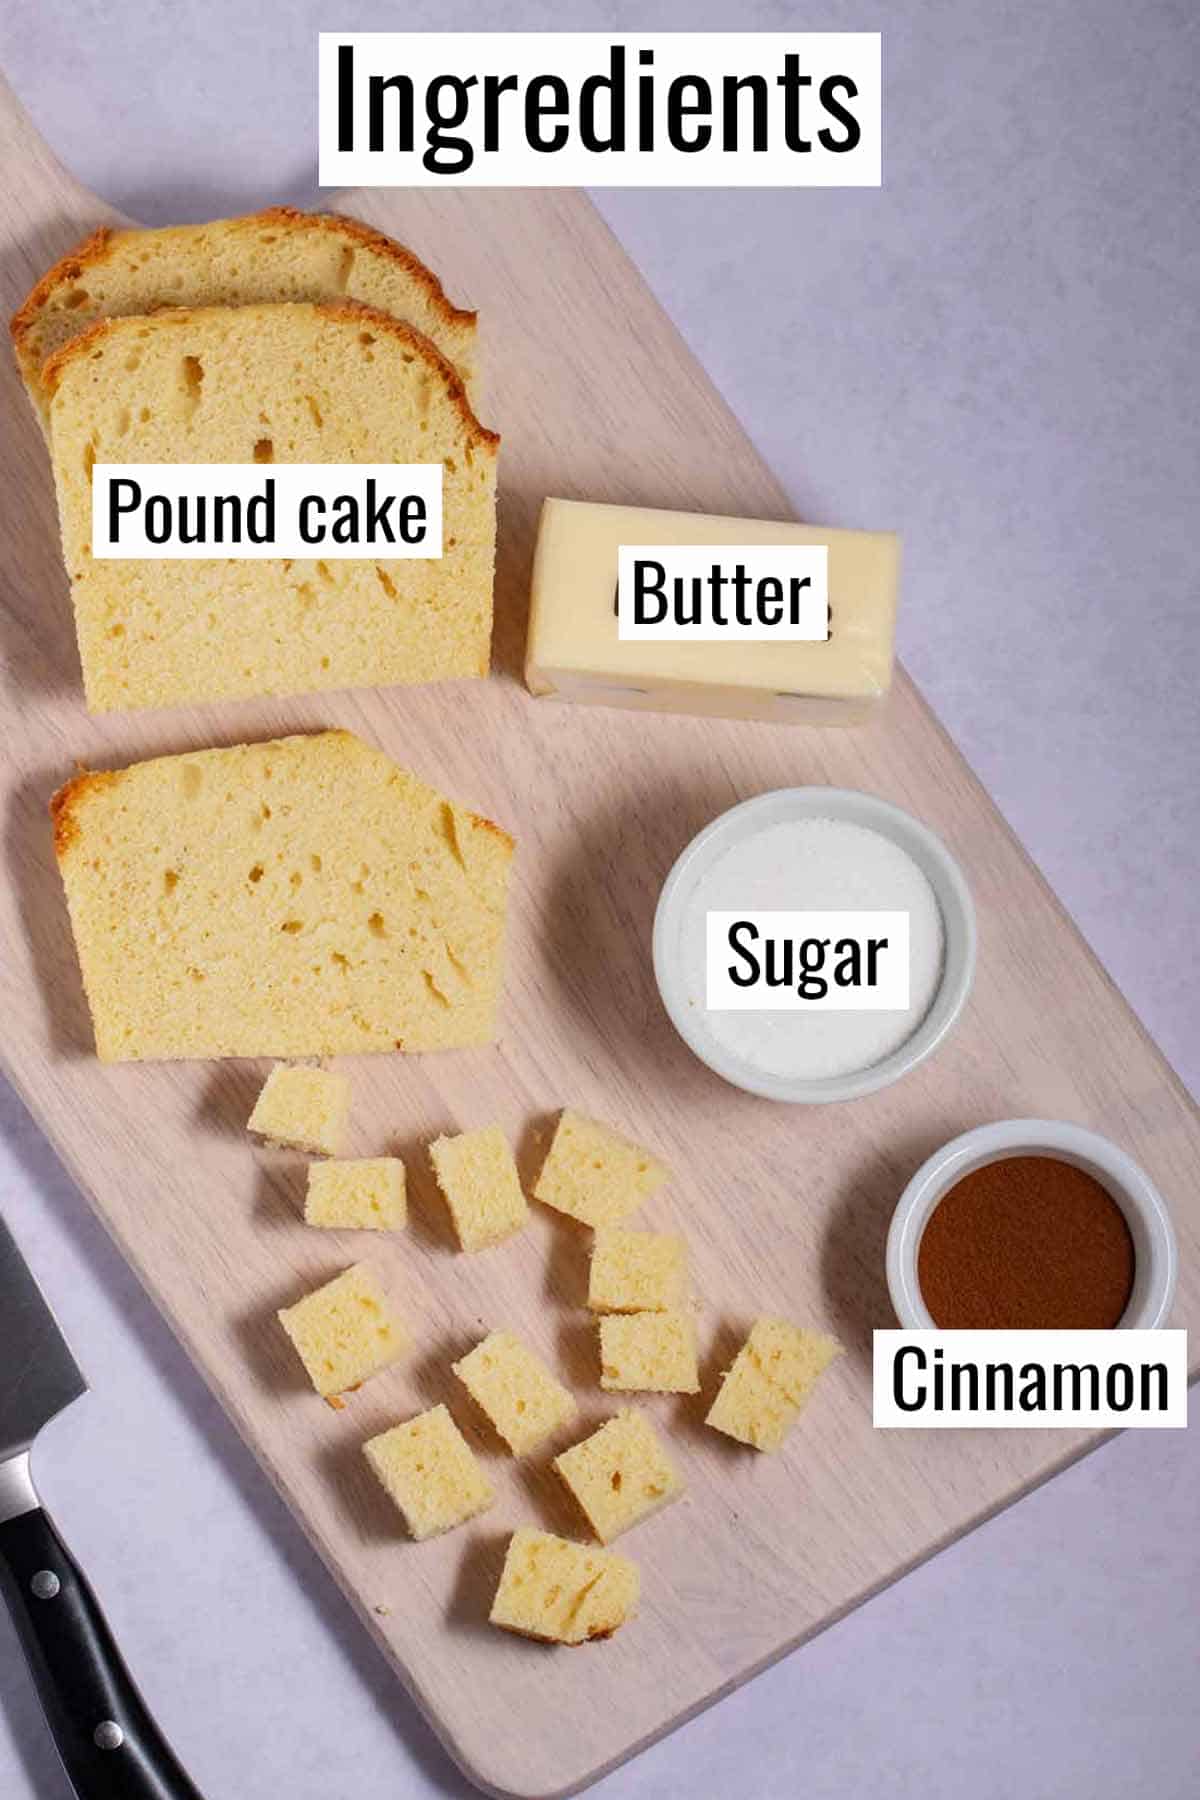 Ingredients on for cinnamon sugar pound cake croutons on a cutting board.